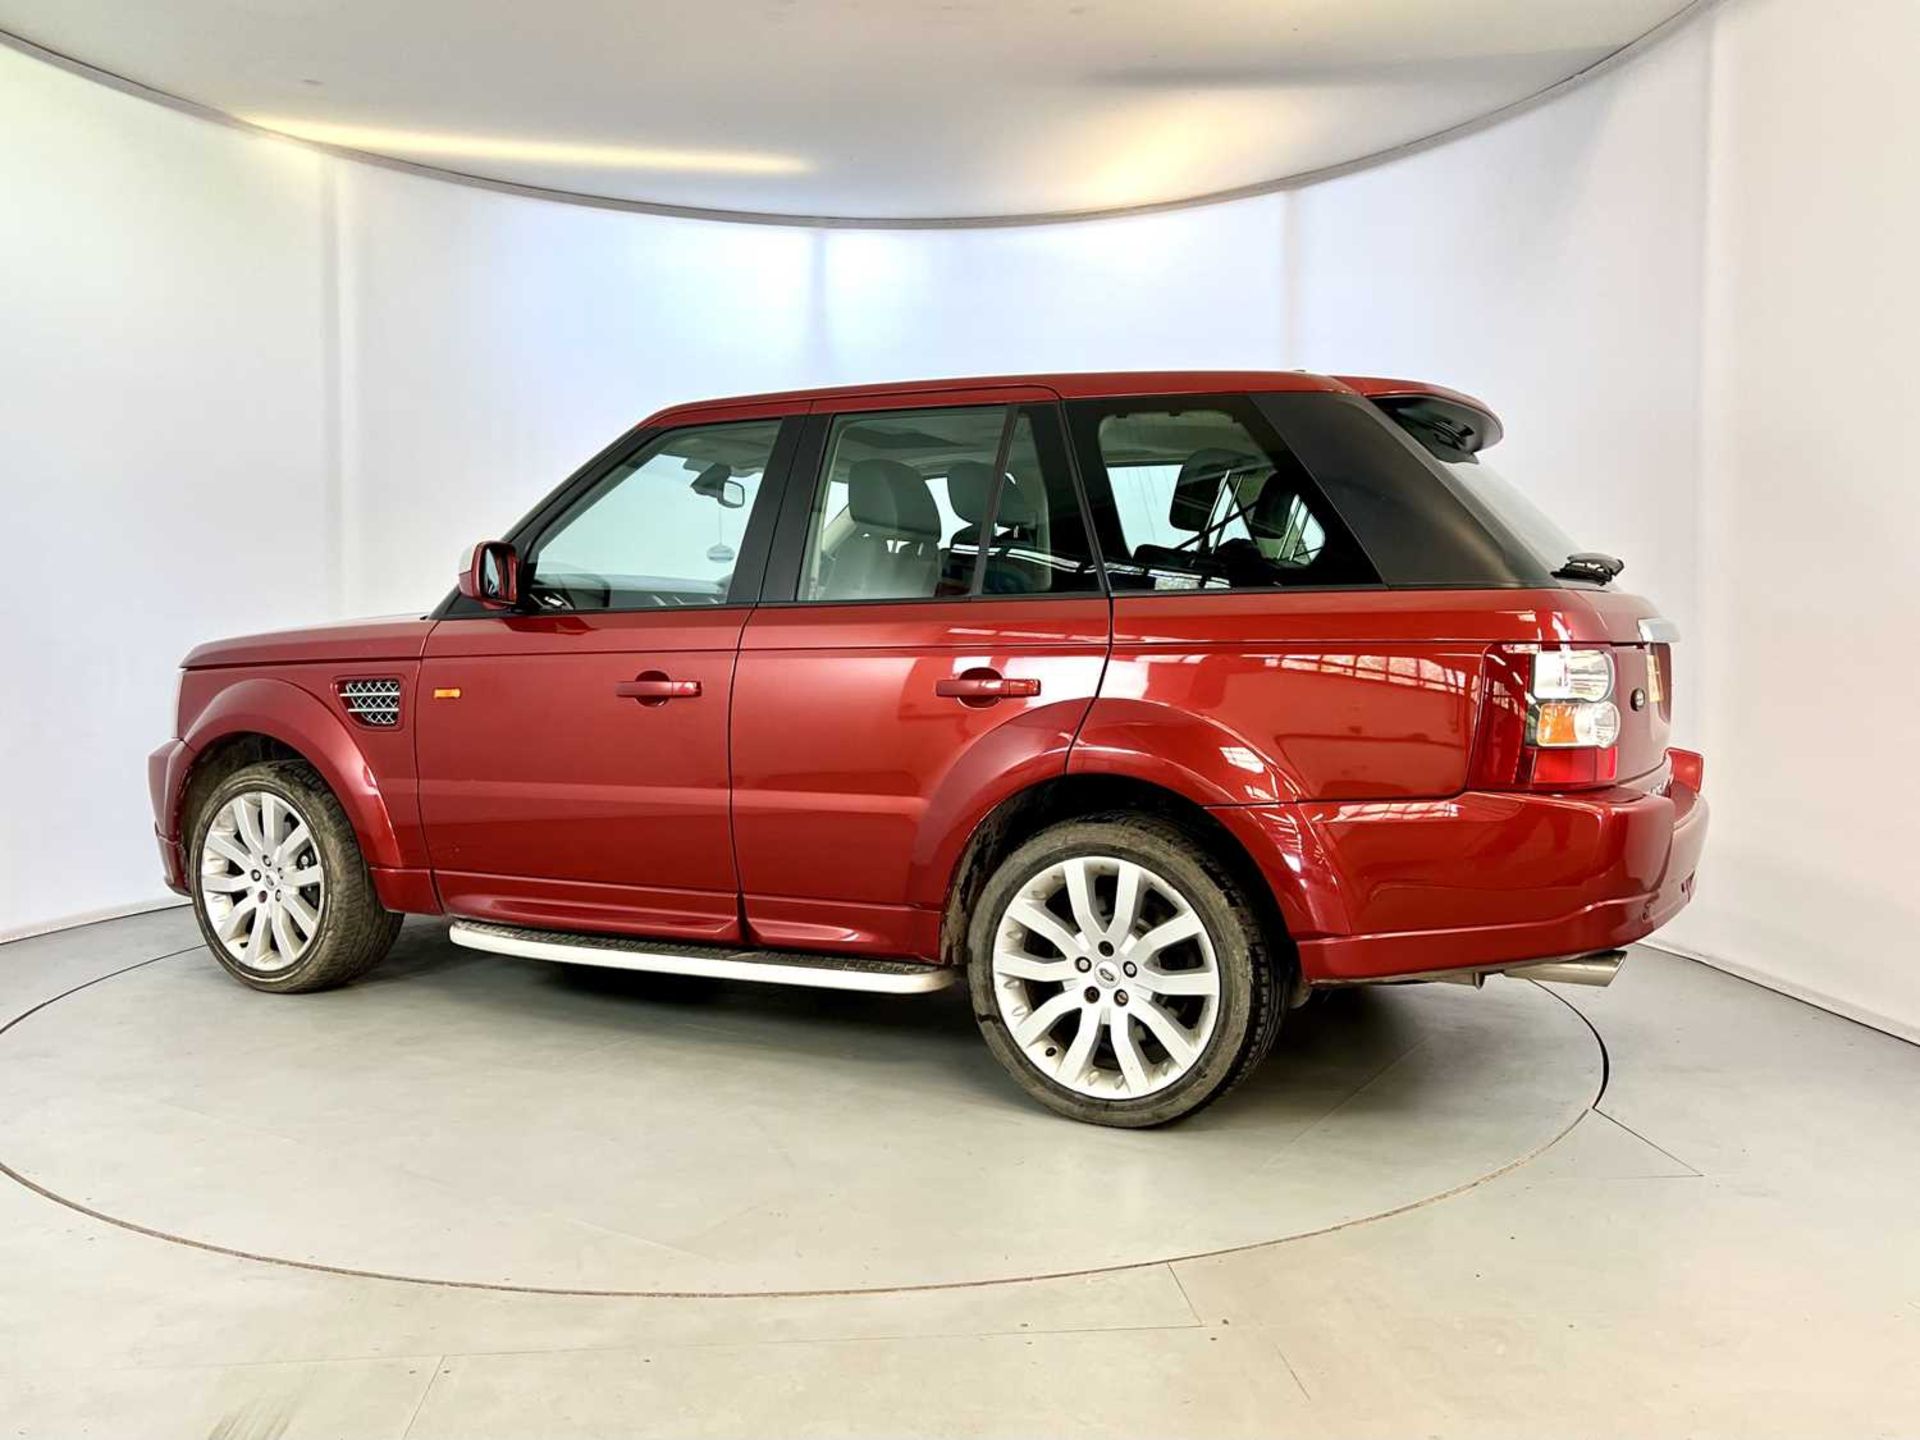 2006 Range Rover Sport 4.2 Supercharged - Image 6 of 34